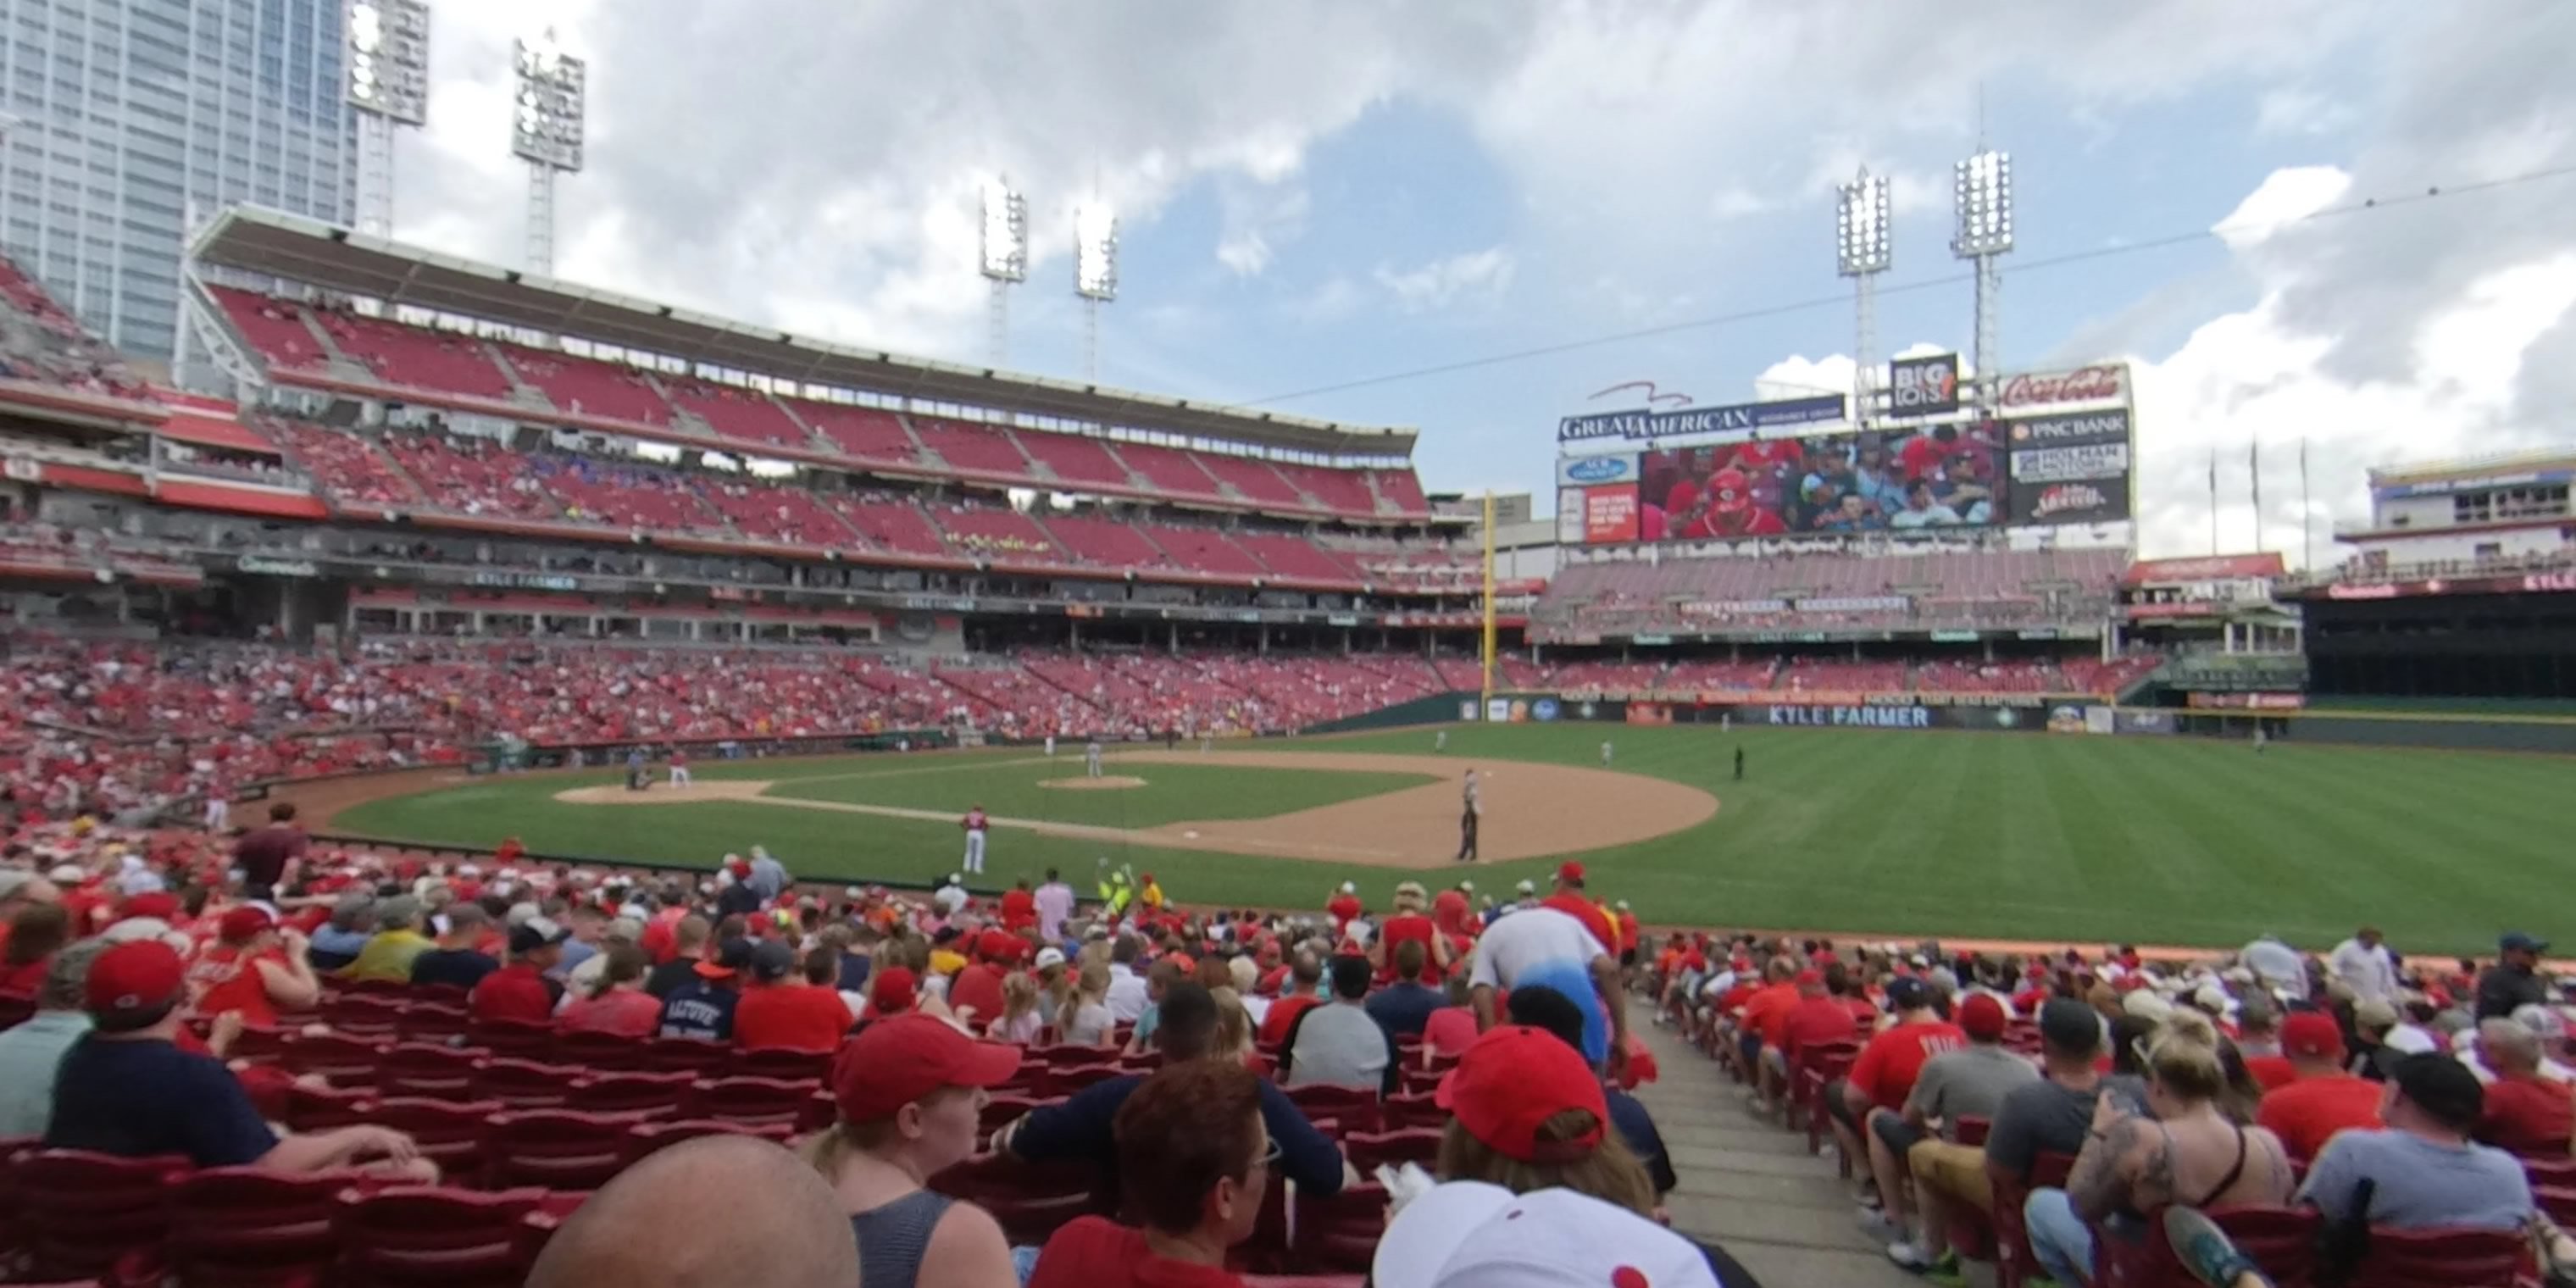 section 132 panoramic seat view  for baseball - great american ball park